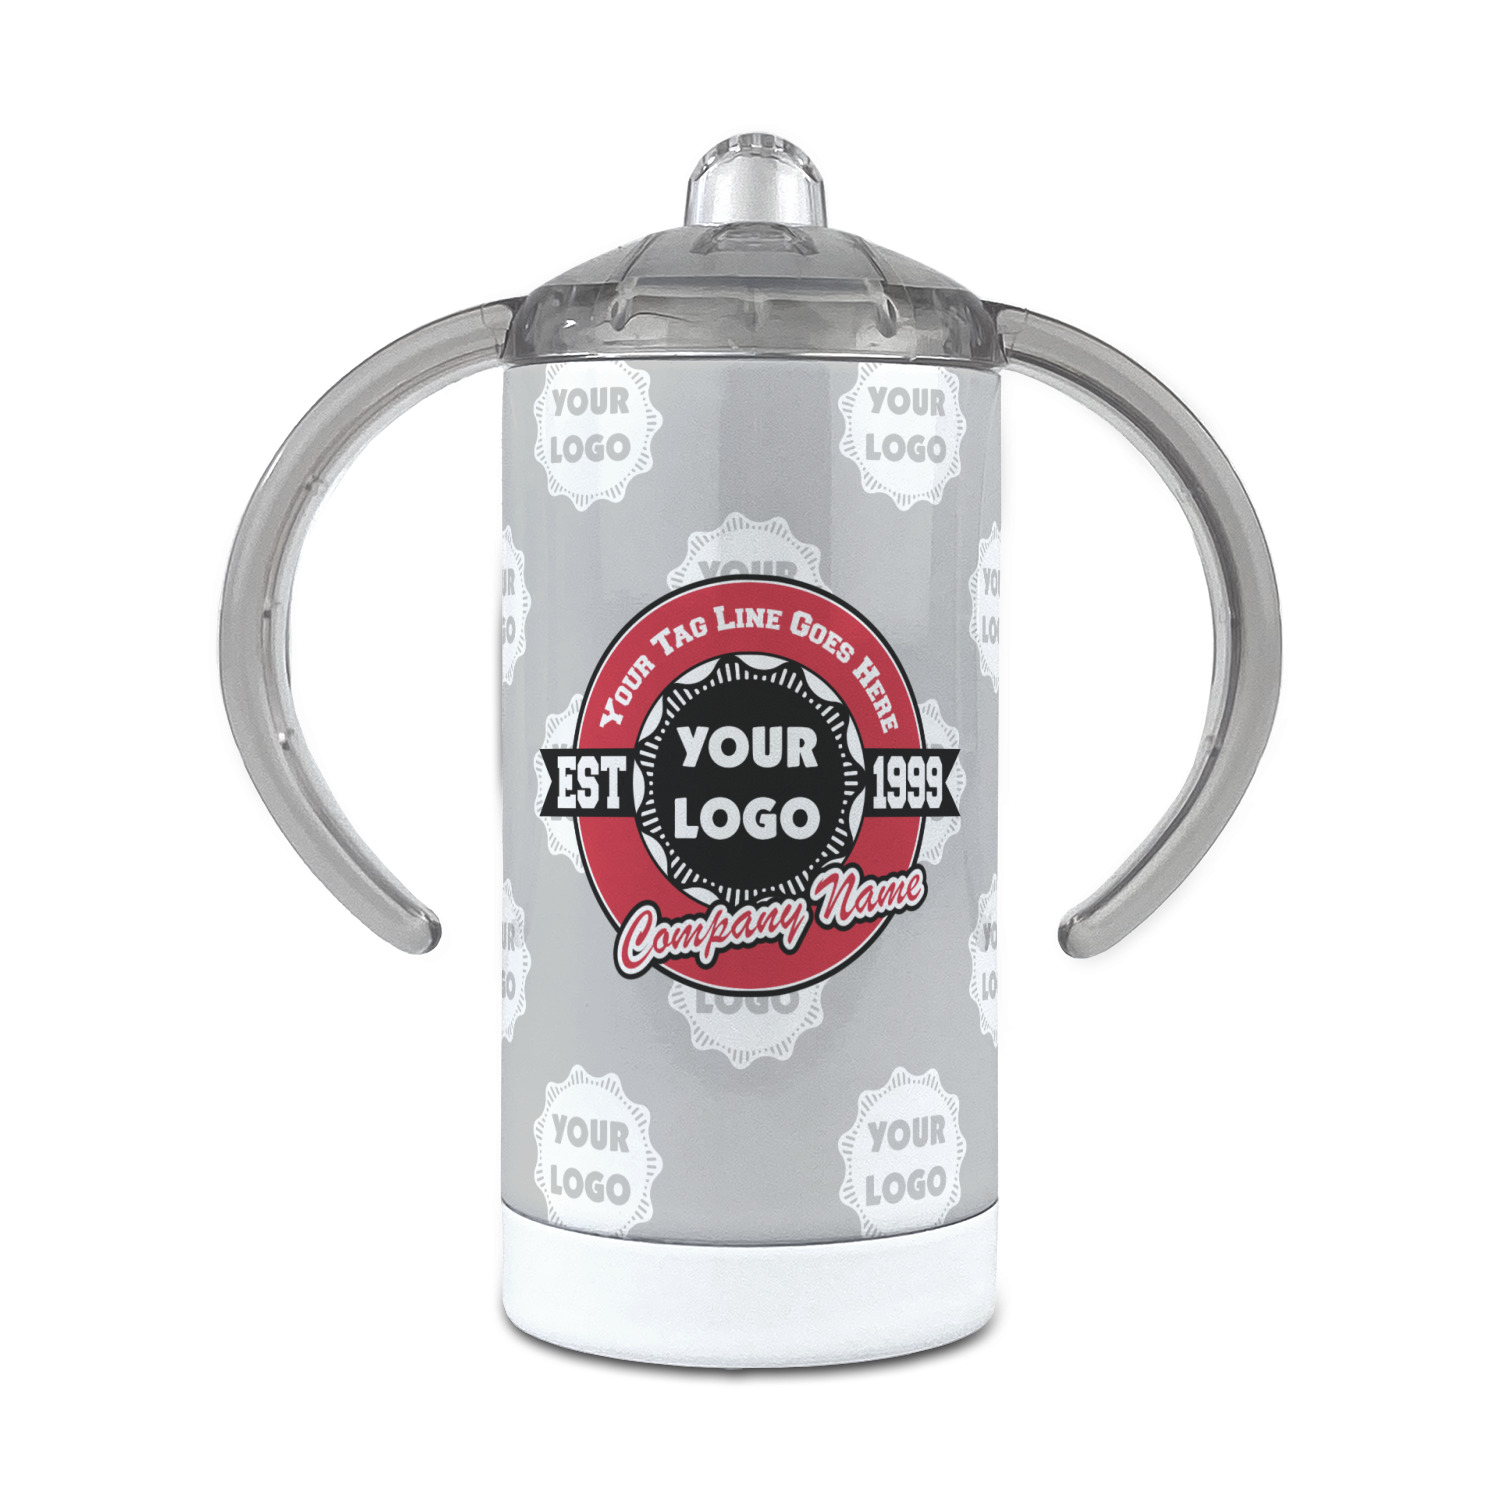 https://www.youcustomizeit.com/common/MAKE/1634642/Logo-Tag-Line-12-oz-Stainless-Steel-Sippy-Cups-FRONT.jpg?lm=1671174256